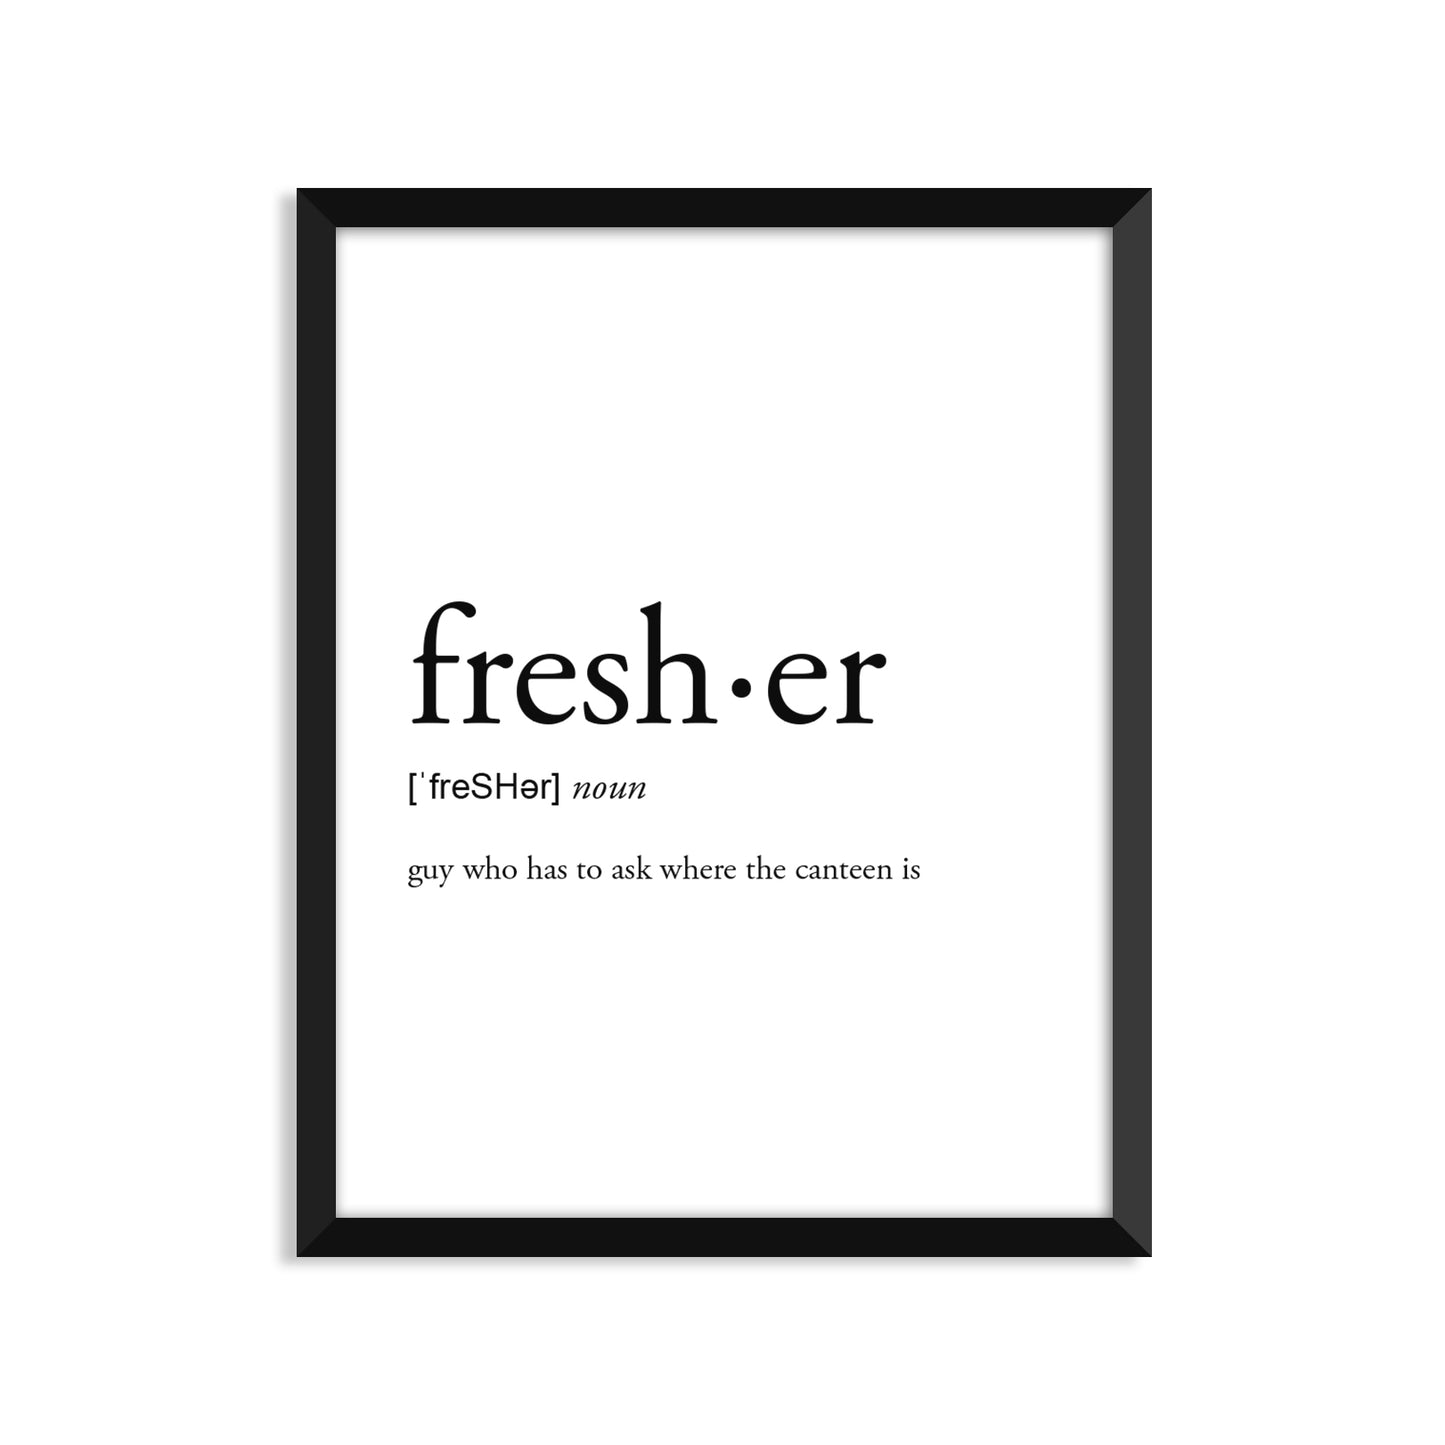 Fresher definition art print or greeting card